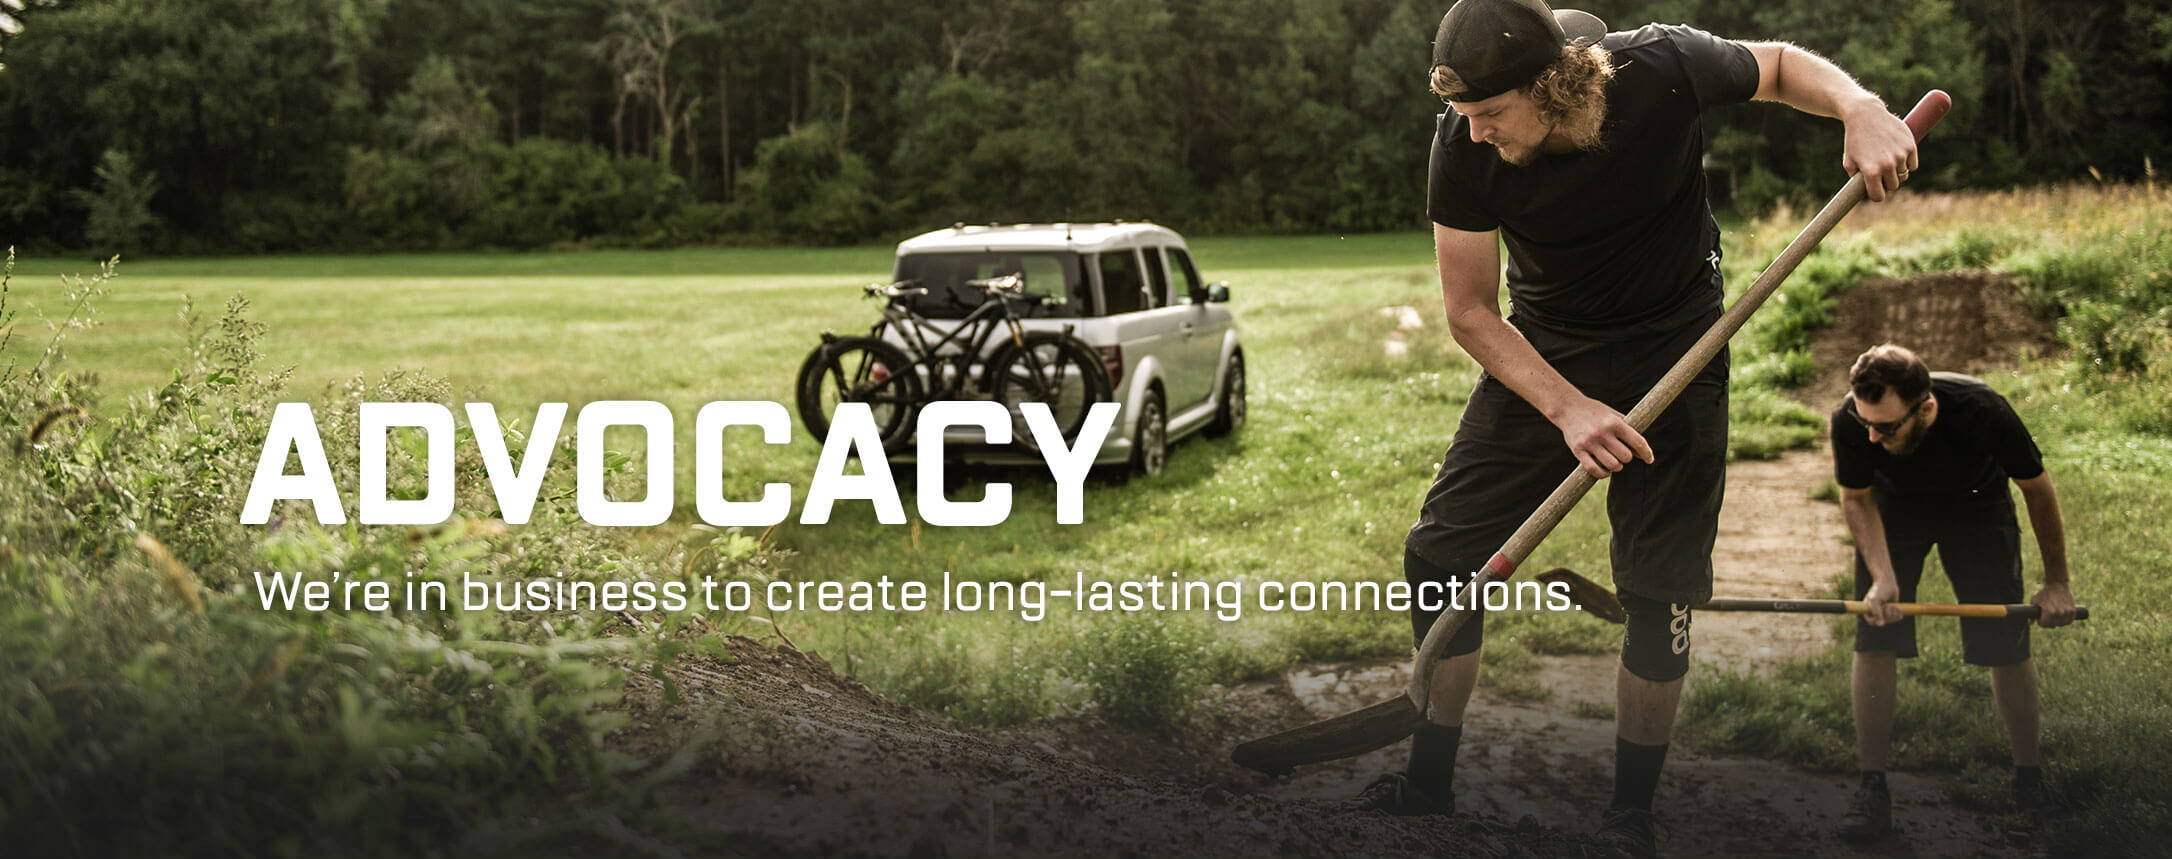 Advocacy — We're in business to create long-lasting connections.